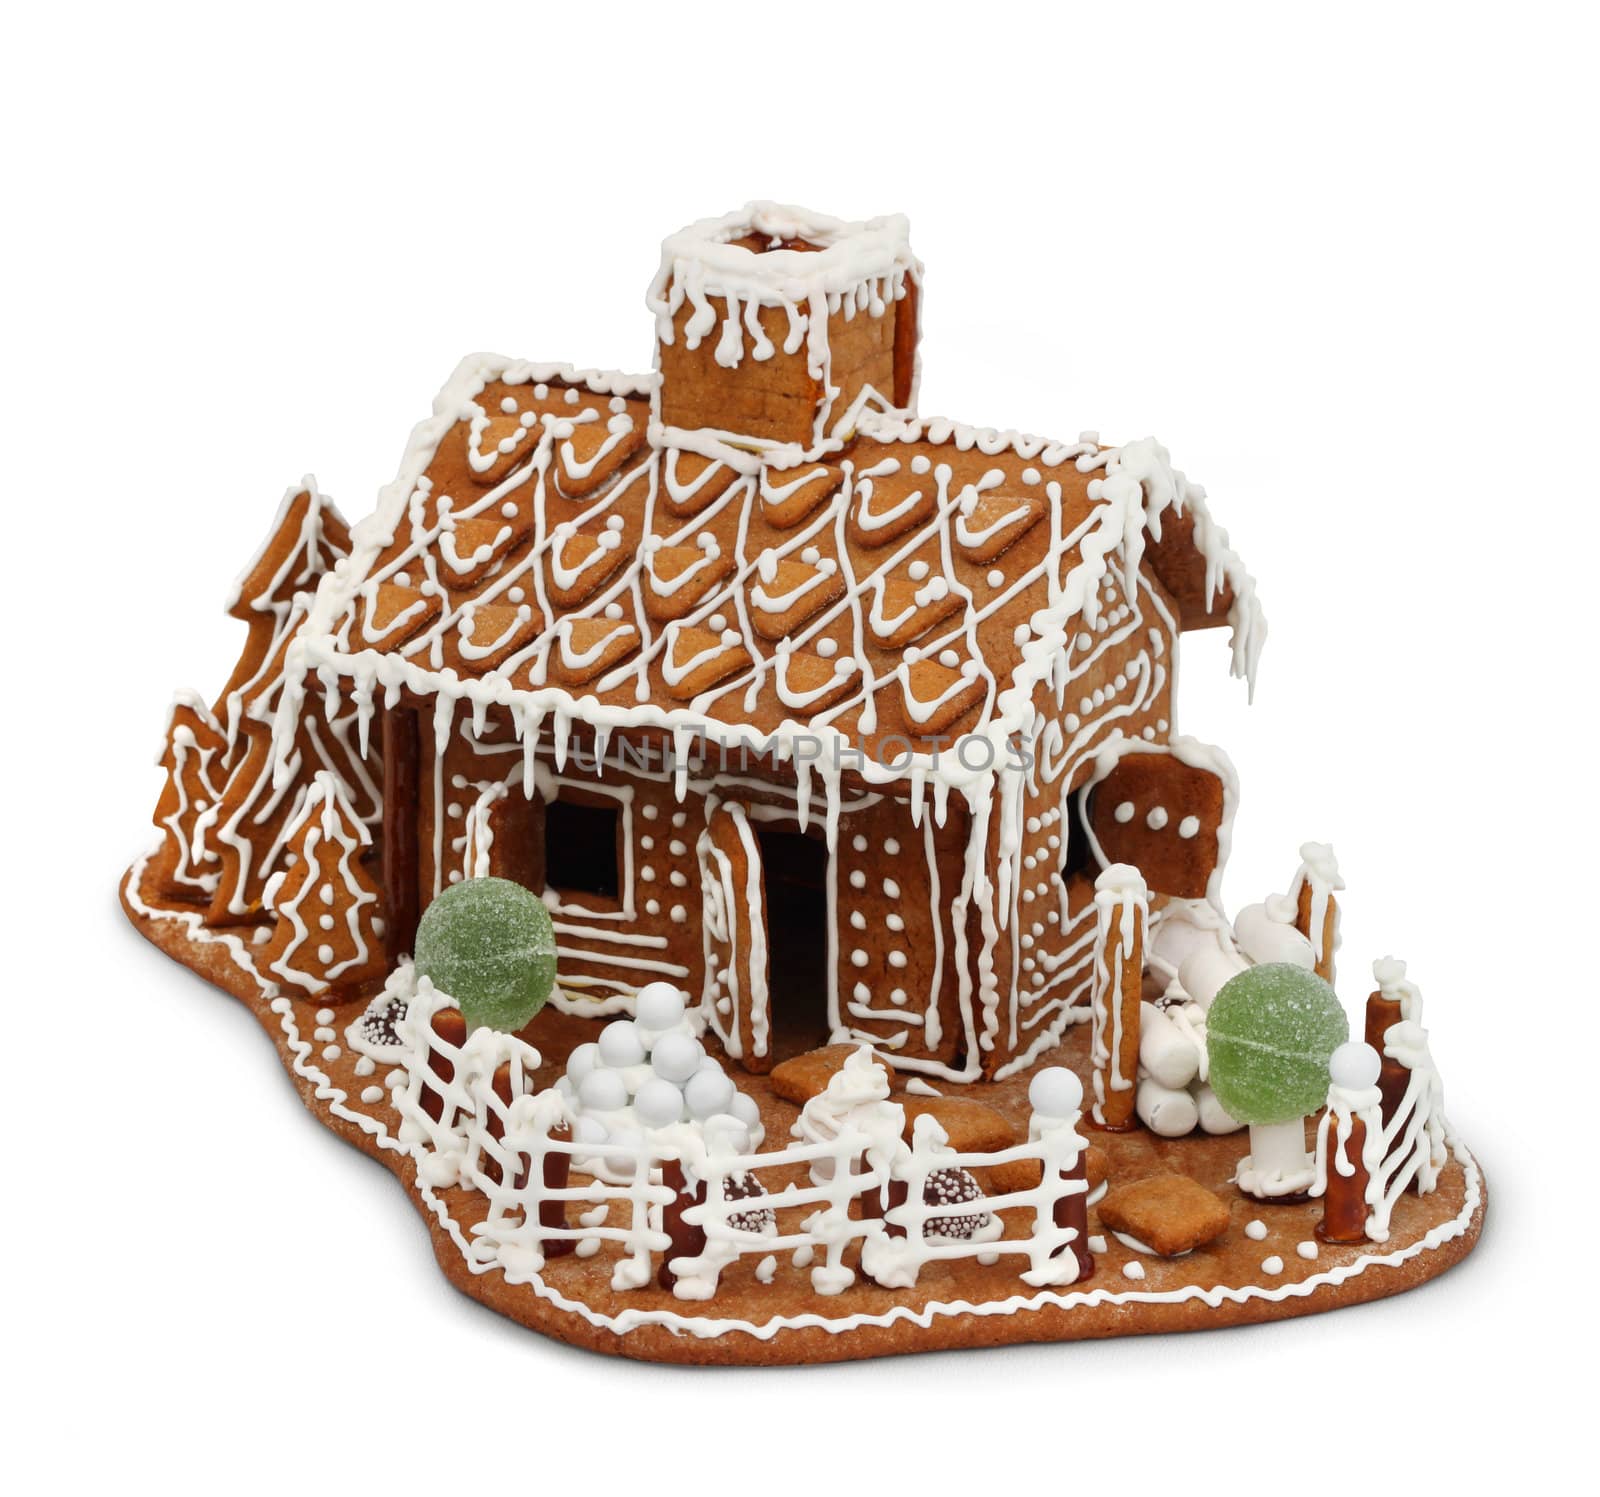 Homemade gingerbread house cottage isolated on white